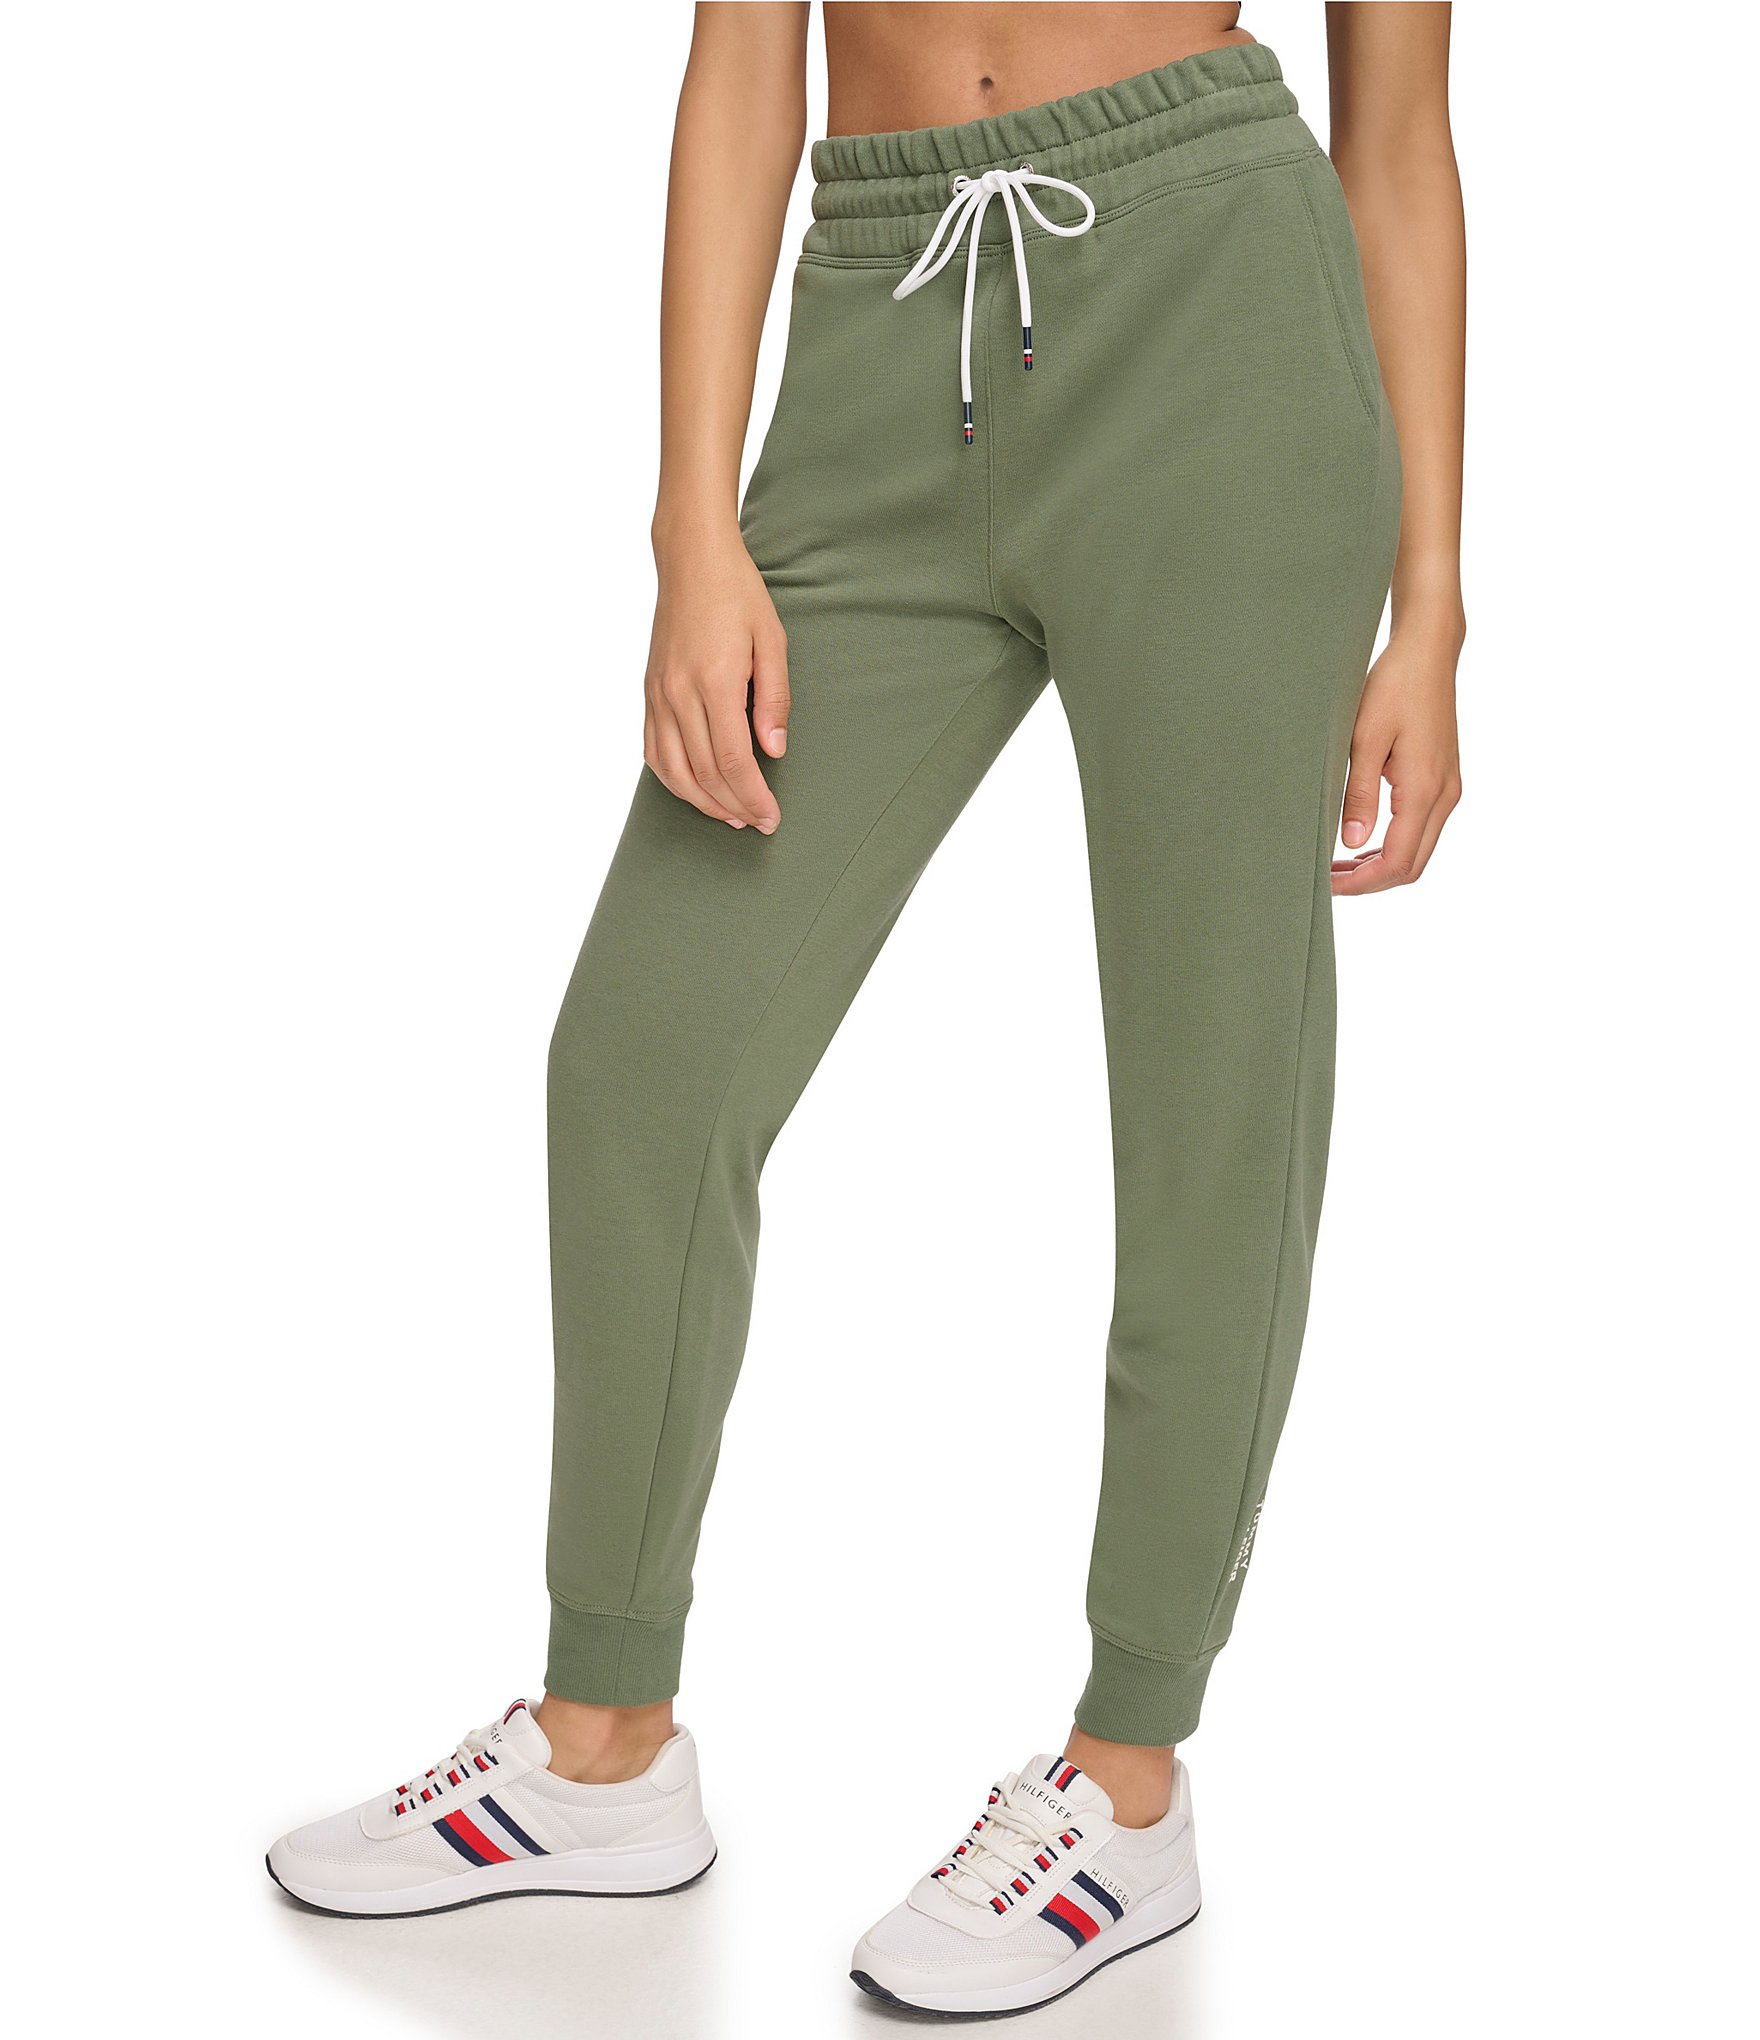 Buy TOMMY HILFIGER Solid Polyester Cotton Regular Fit Girls Joggers